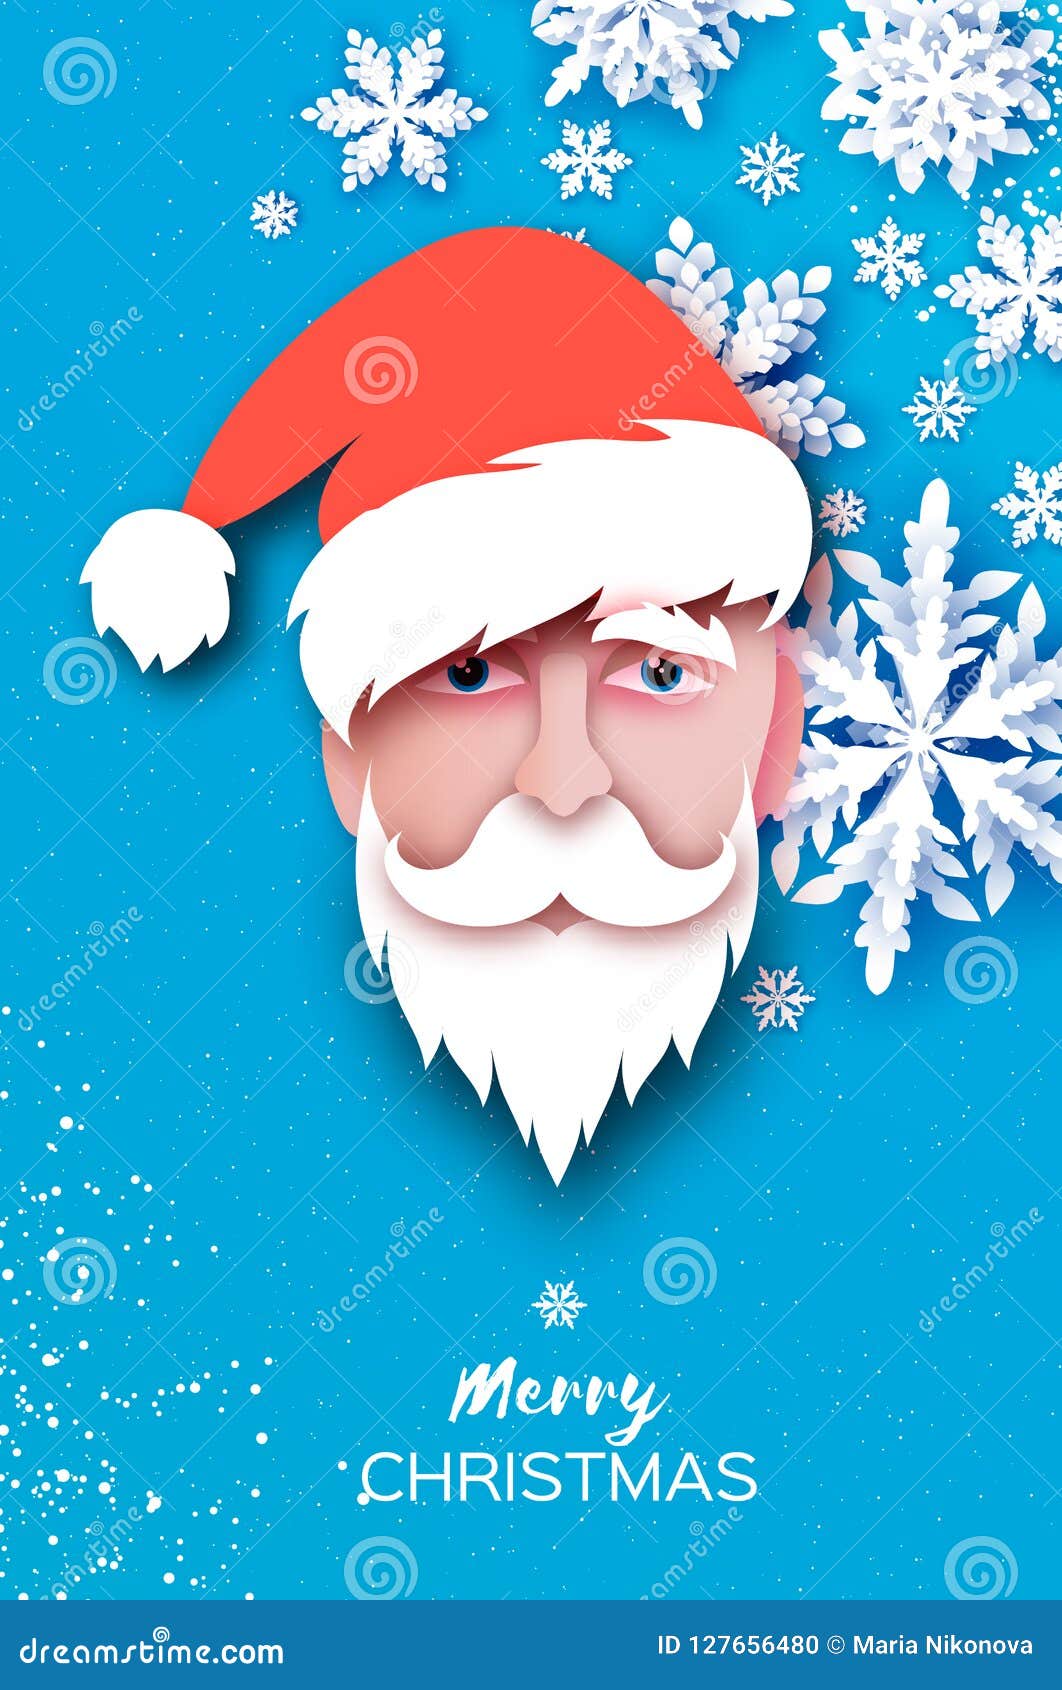 Download Santa Claus Hat And Beard In Paper Cut Style. Origami ...